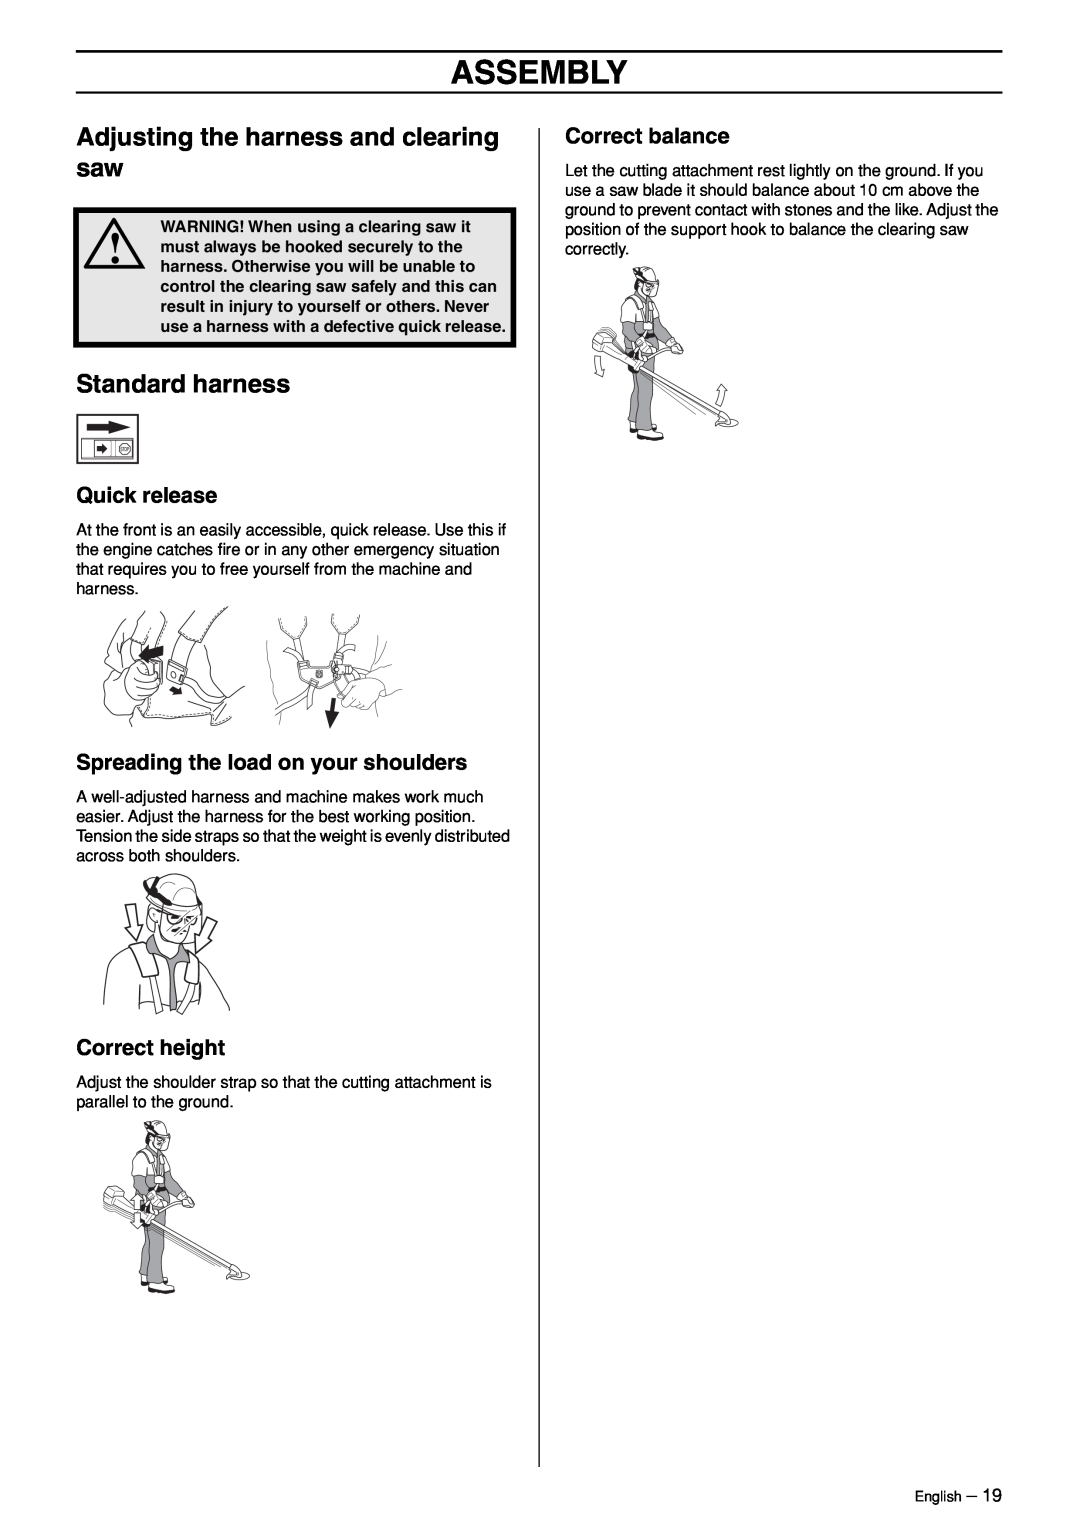 Husqvarna 324RX-Series manual Adjusting the harness and clearing saw, Standard harness, Assembly 